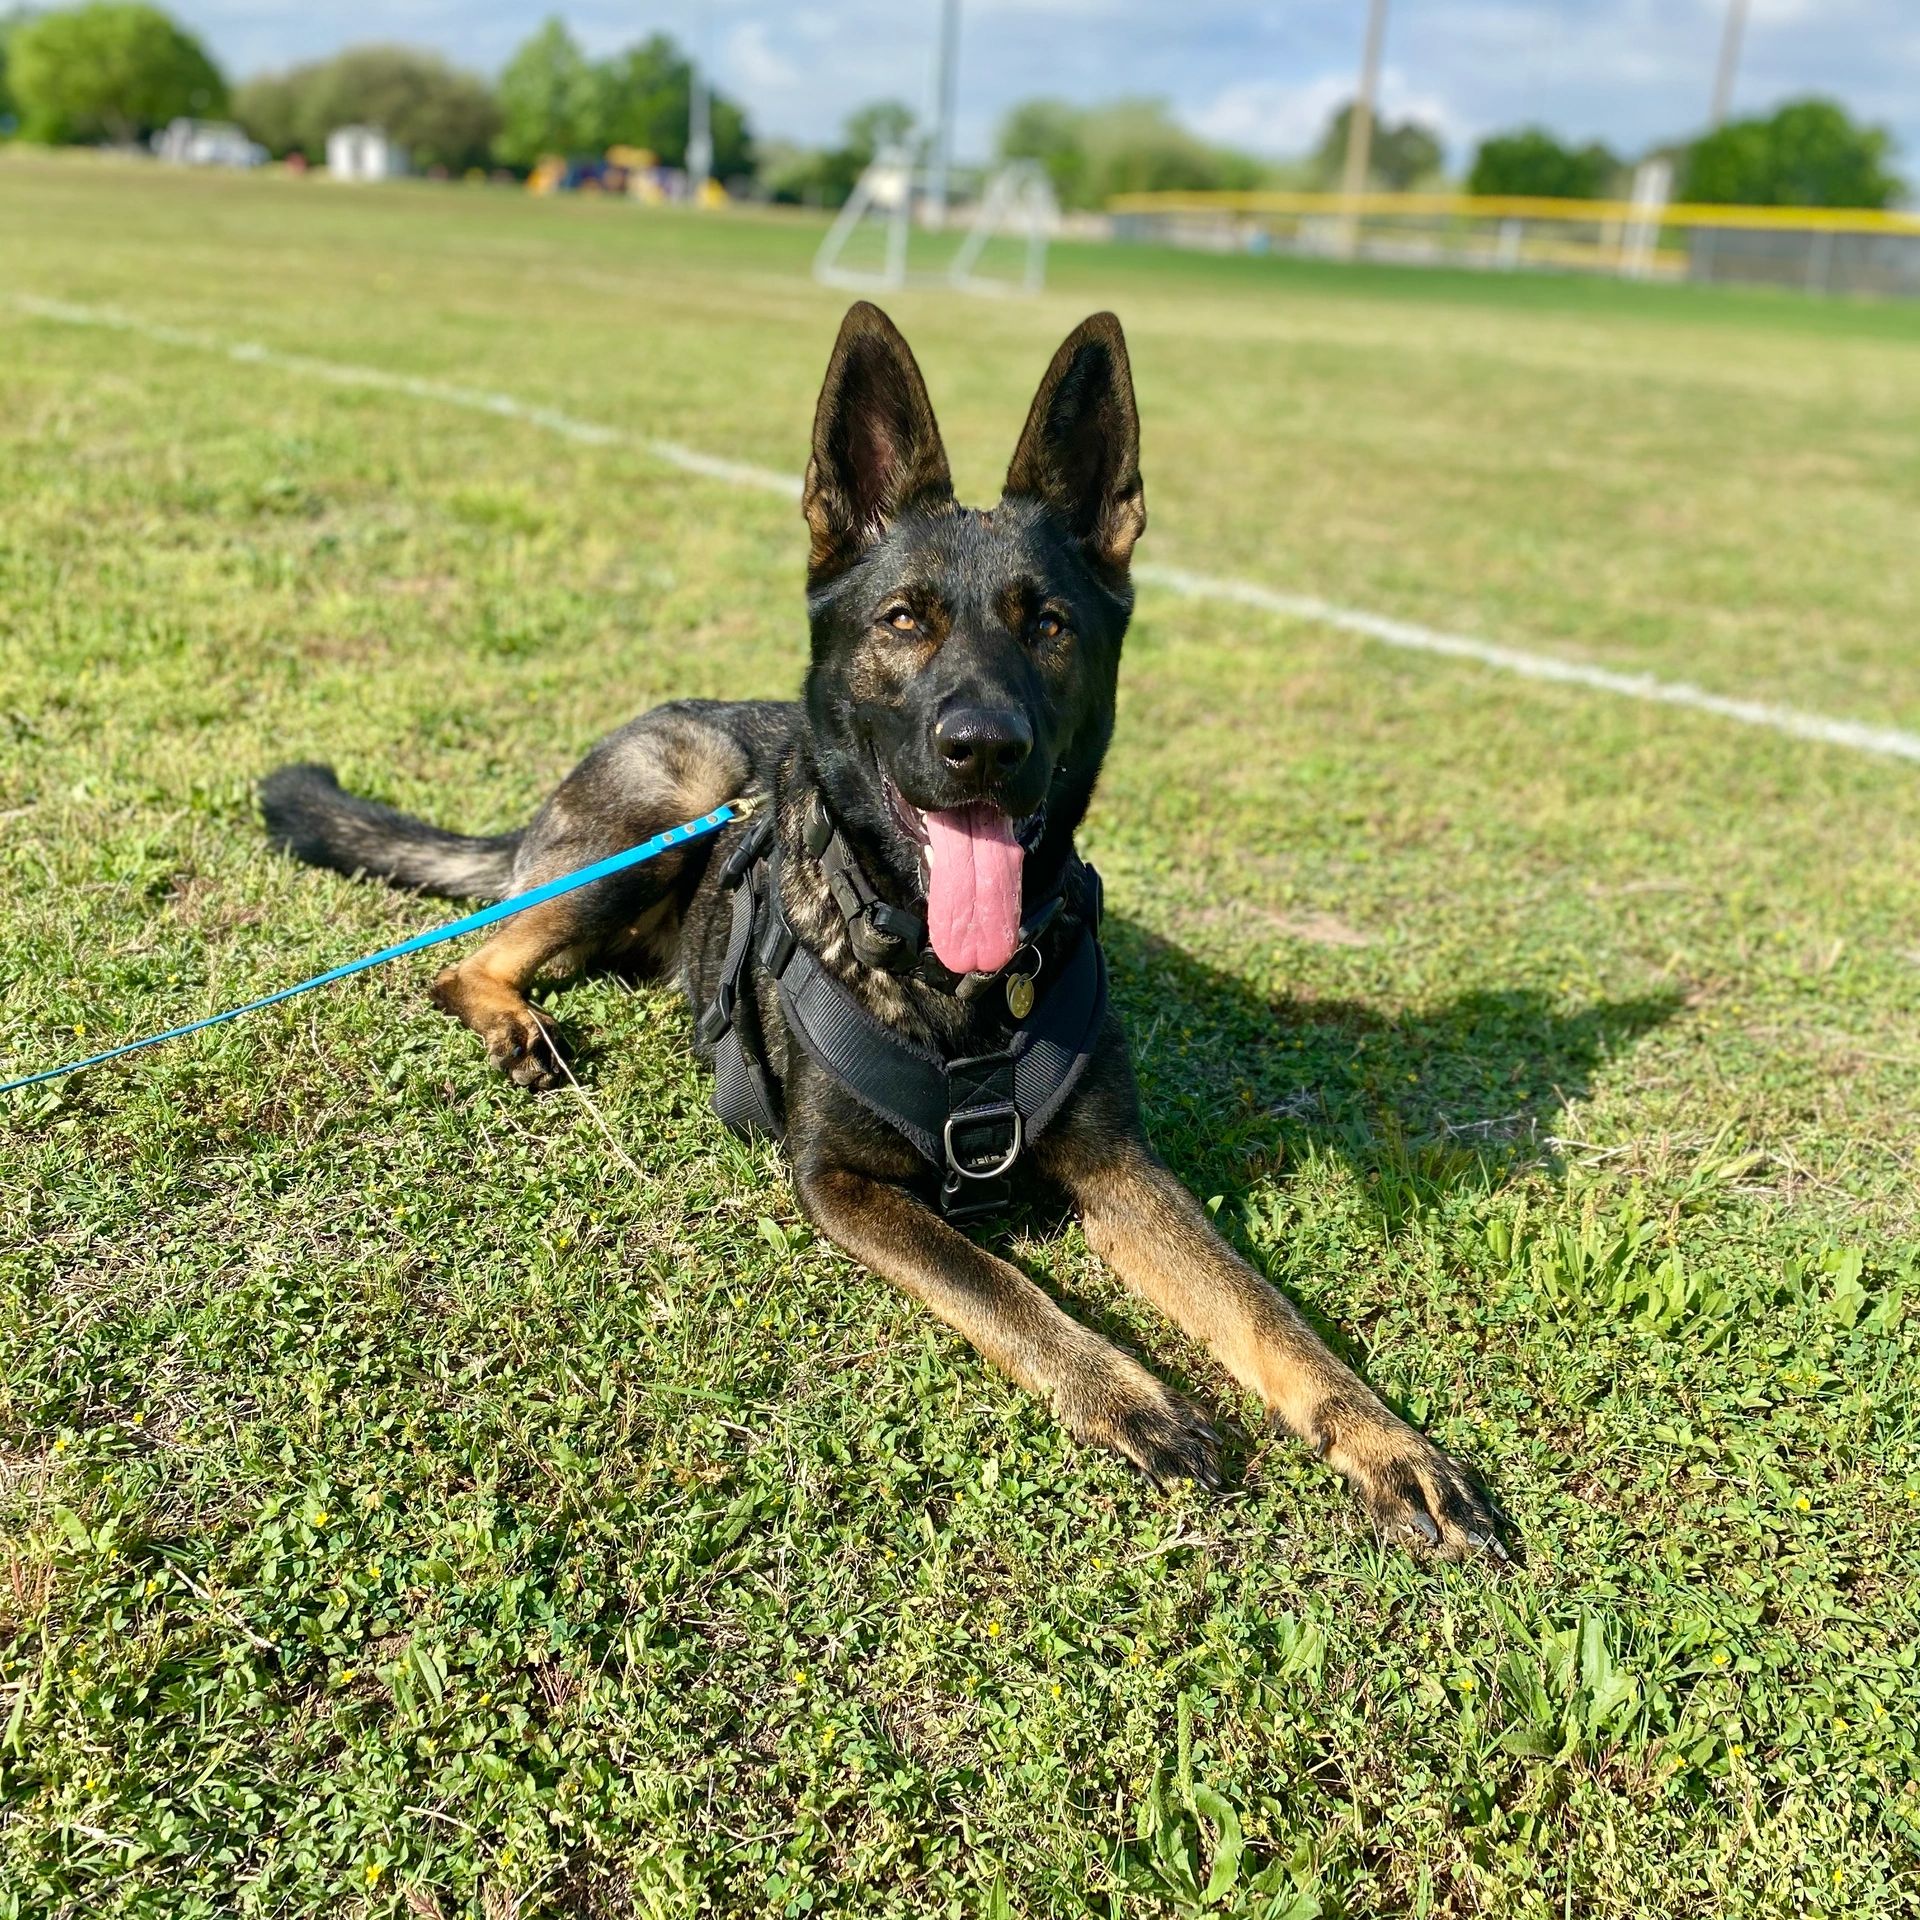 A sable german shepherd lays in the middle of a bright green soccer field.